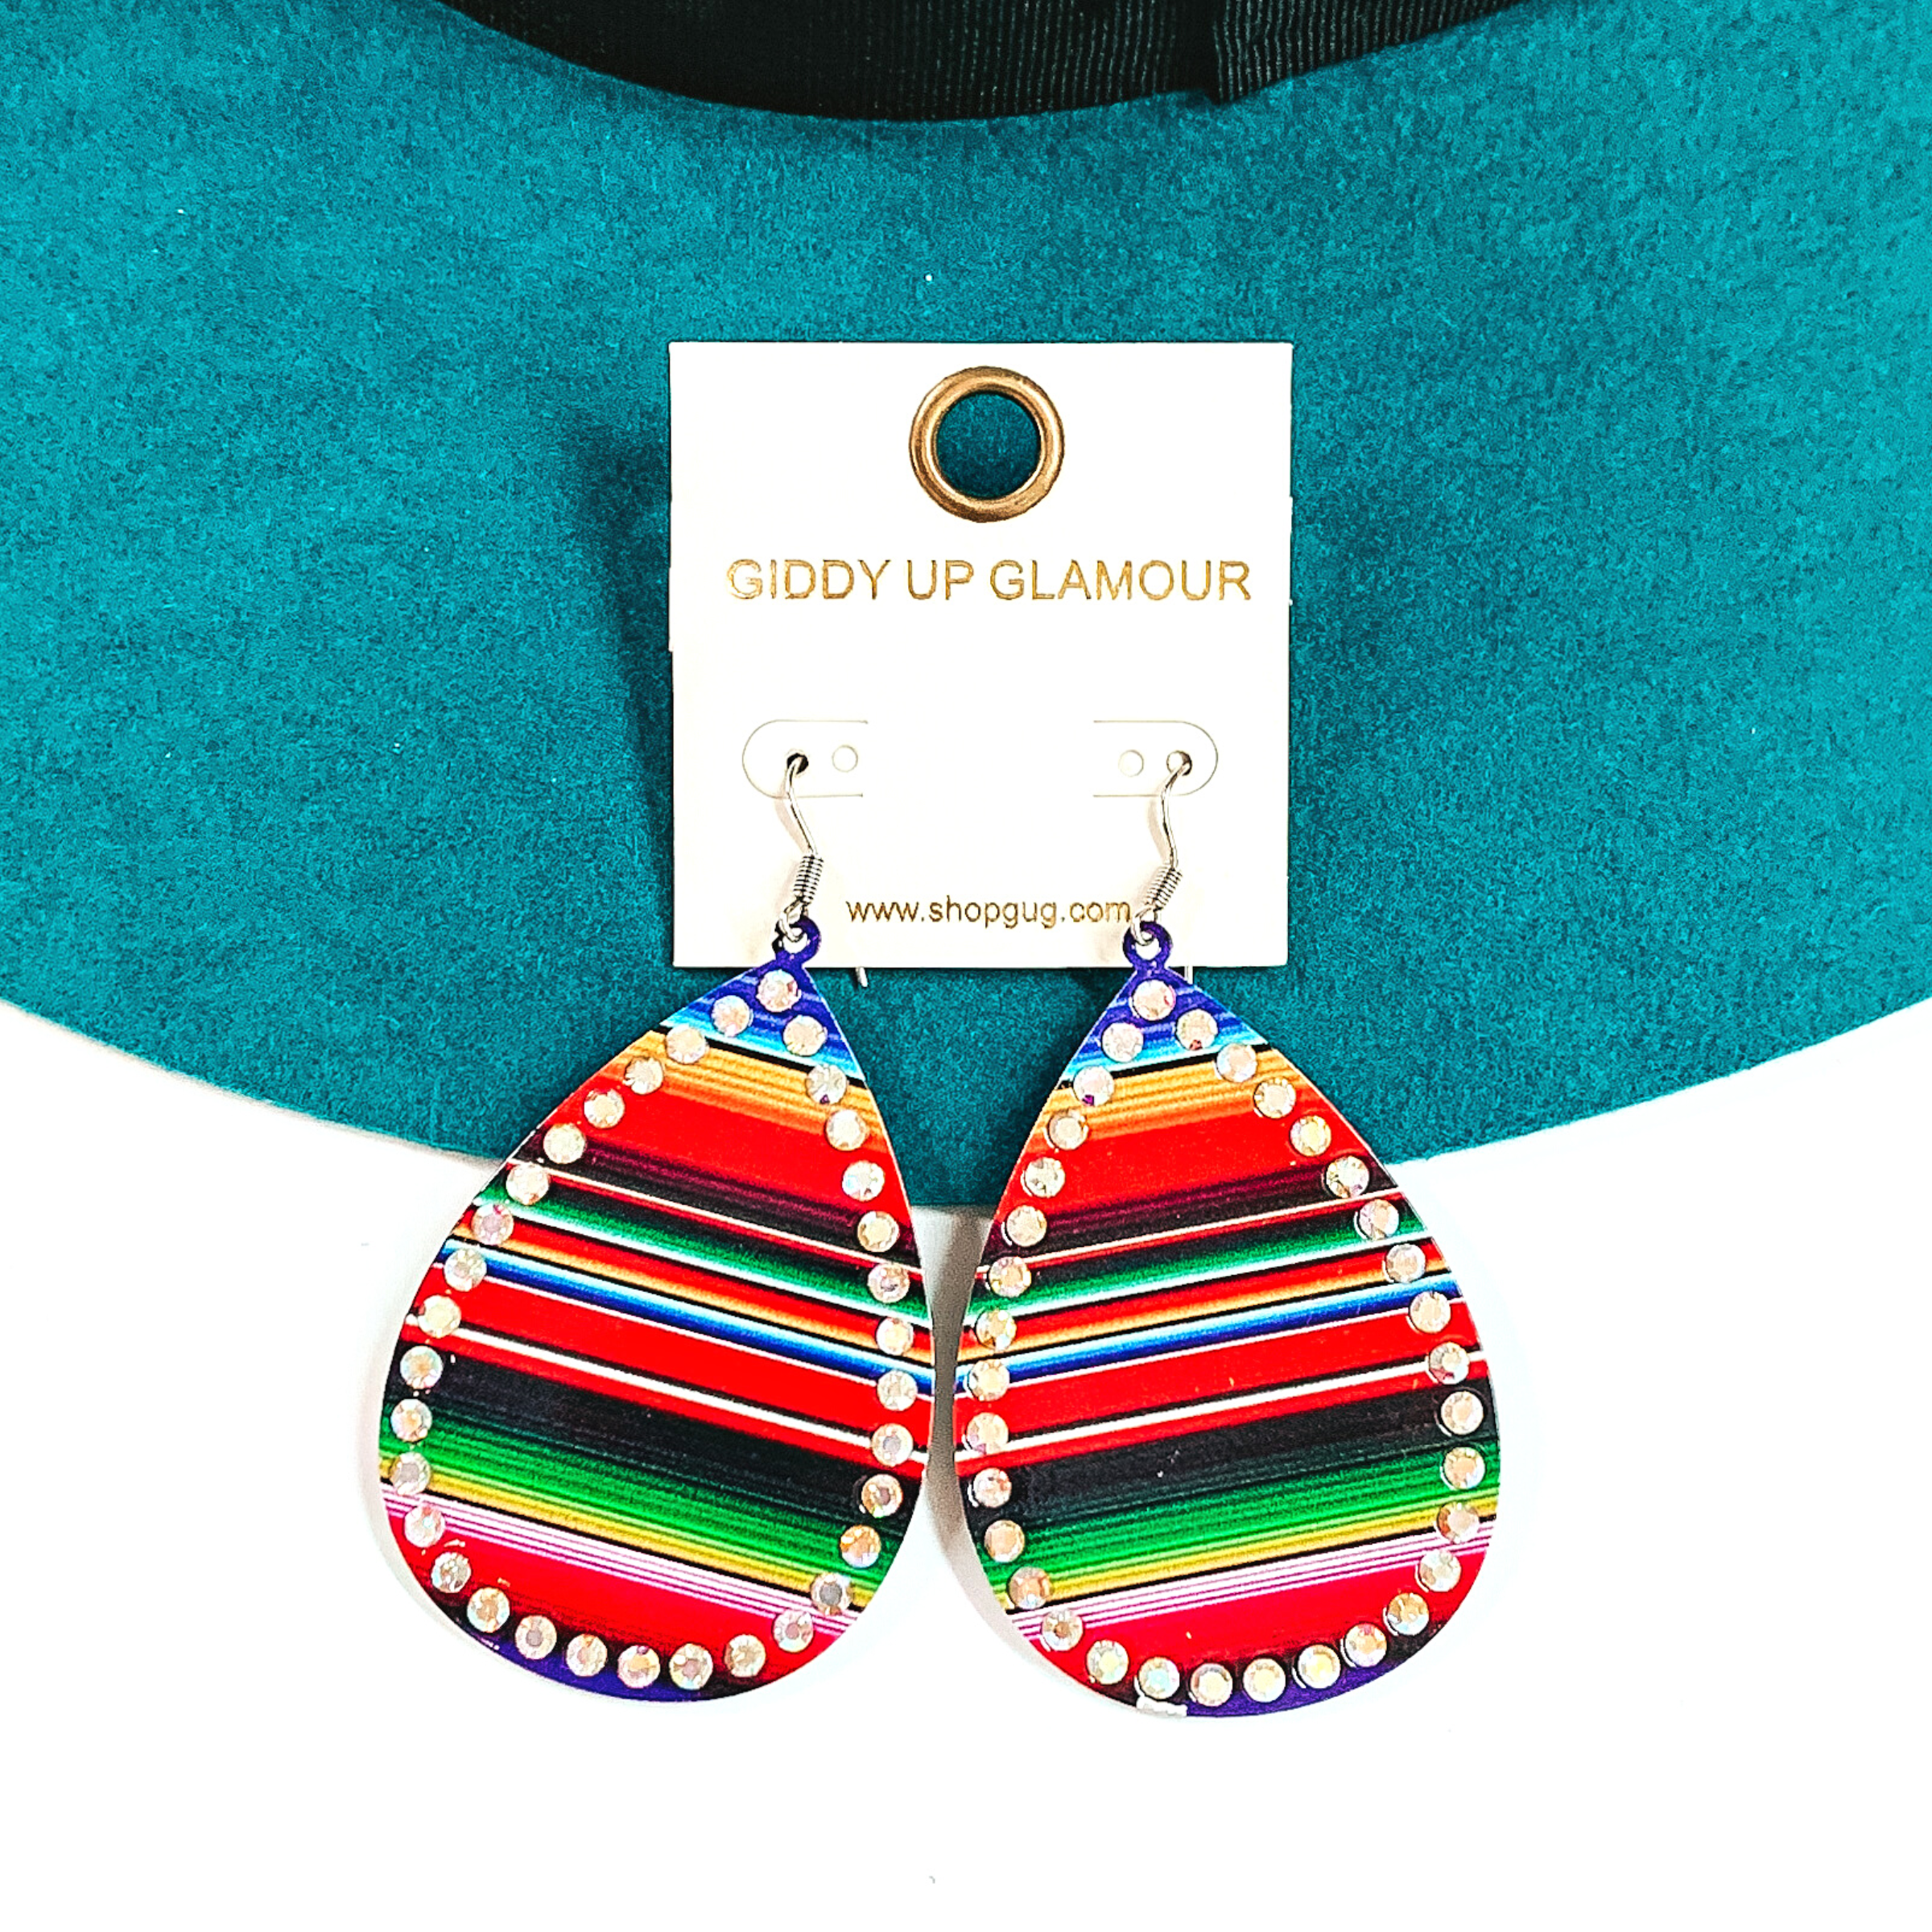 These are teardrop serape print earrings with ab crystals all around. The serape print  is in a red mix such as; red, blue, orange, green, and a bit of black. These  earrings are taken on a teal felt hat brim and on a white background.